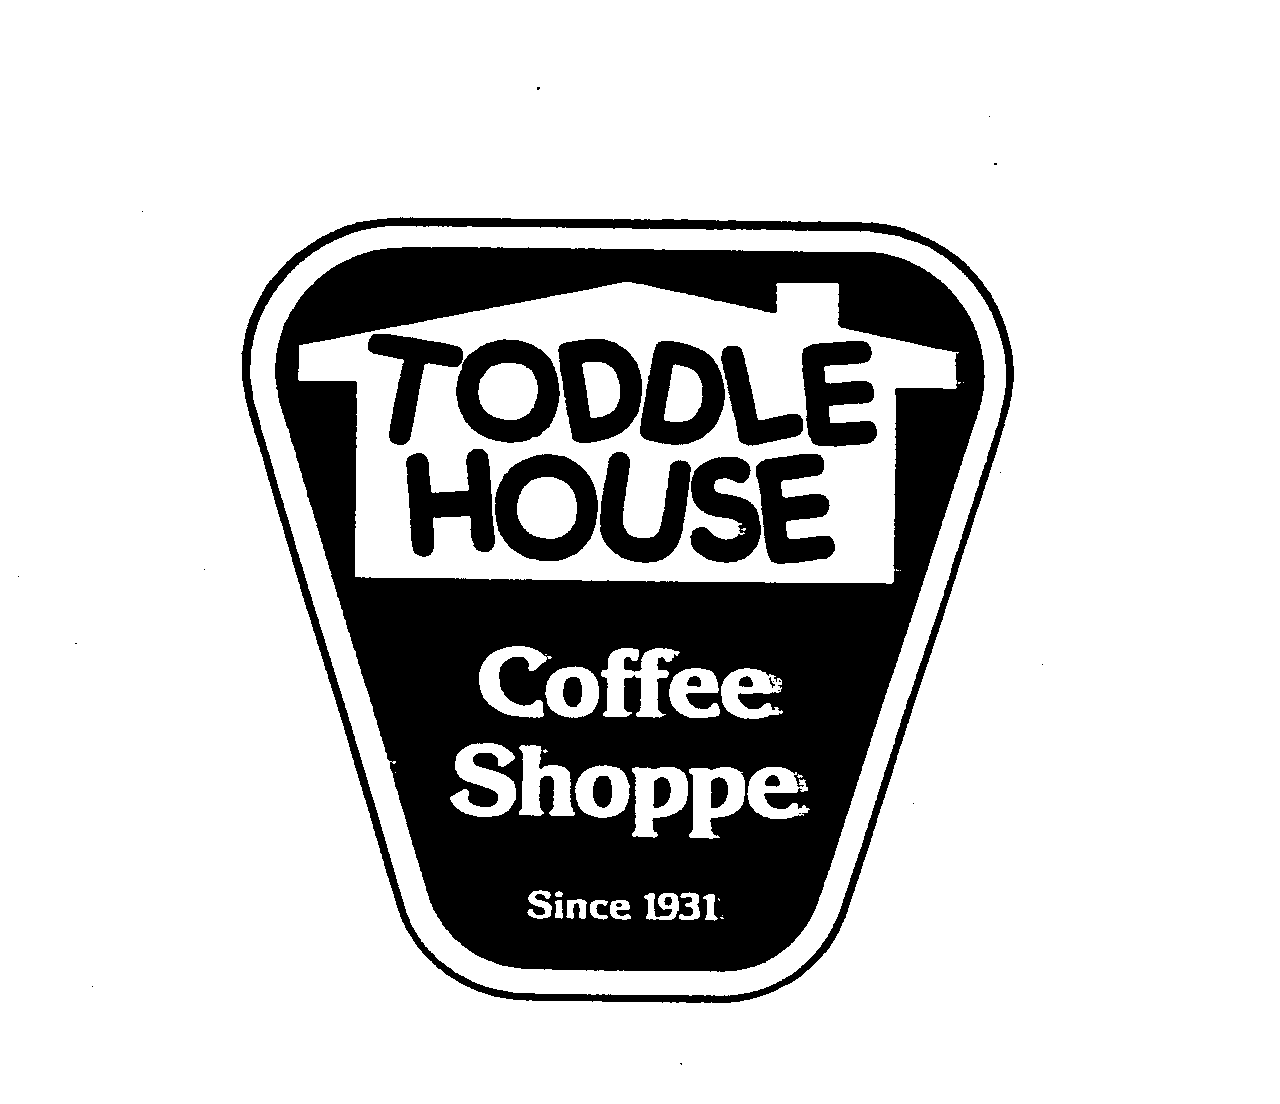  TODDLE HOUSE COFFEE SHOPPE SINCE 1931